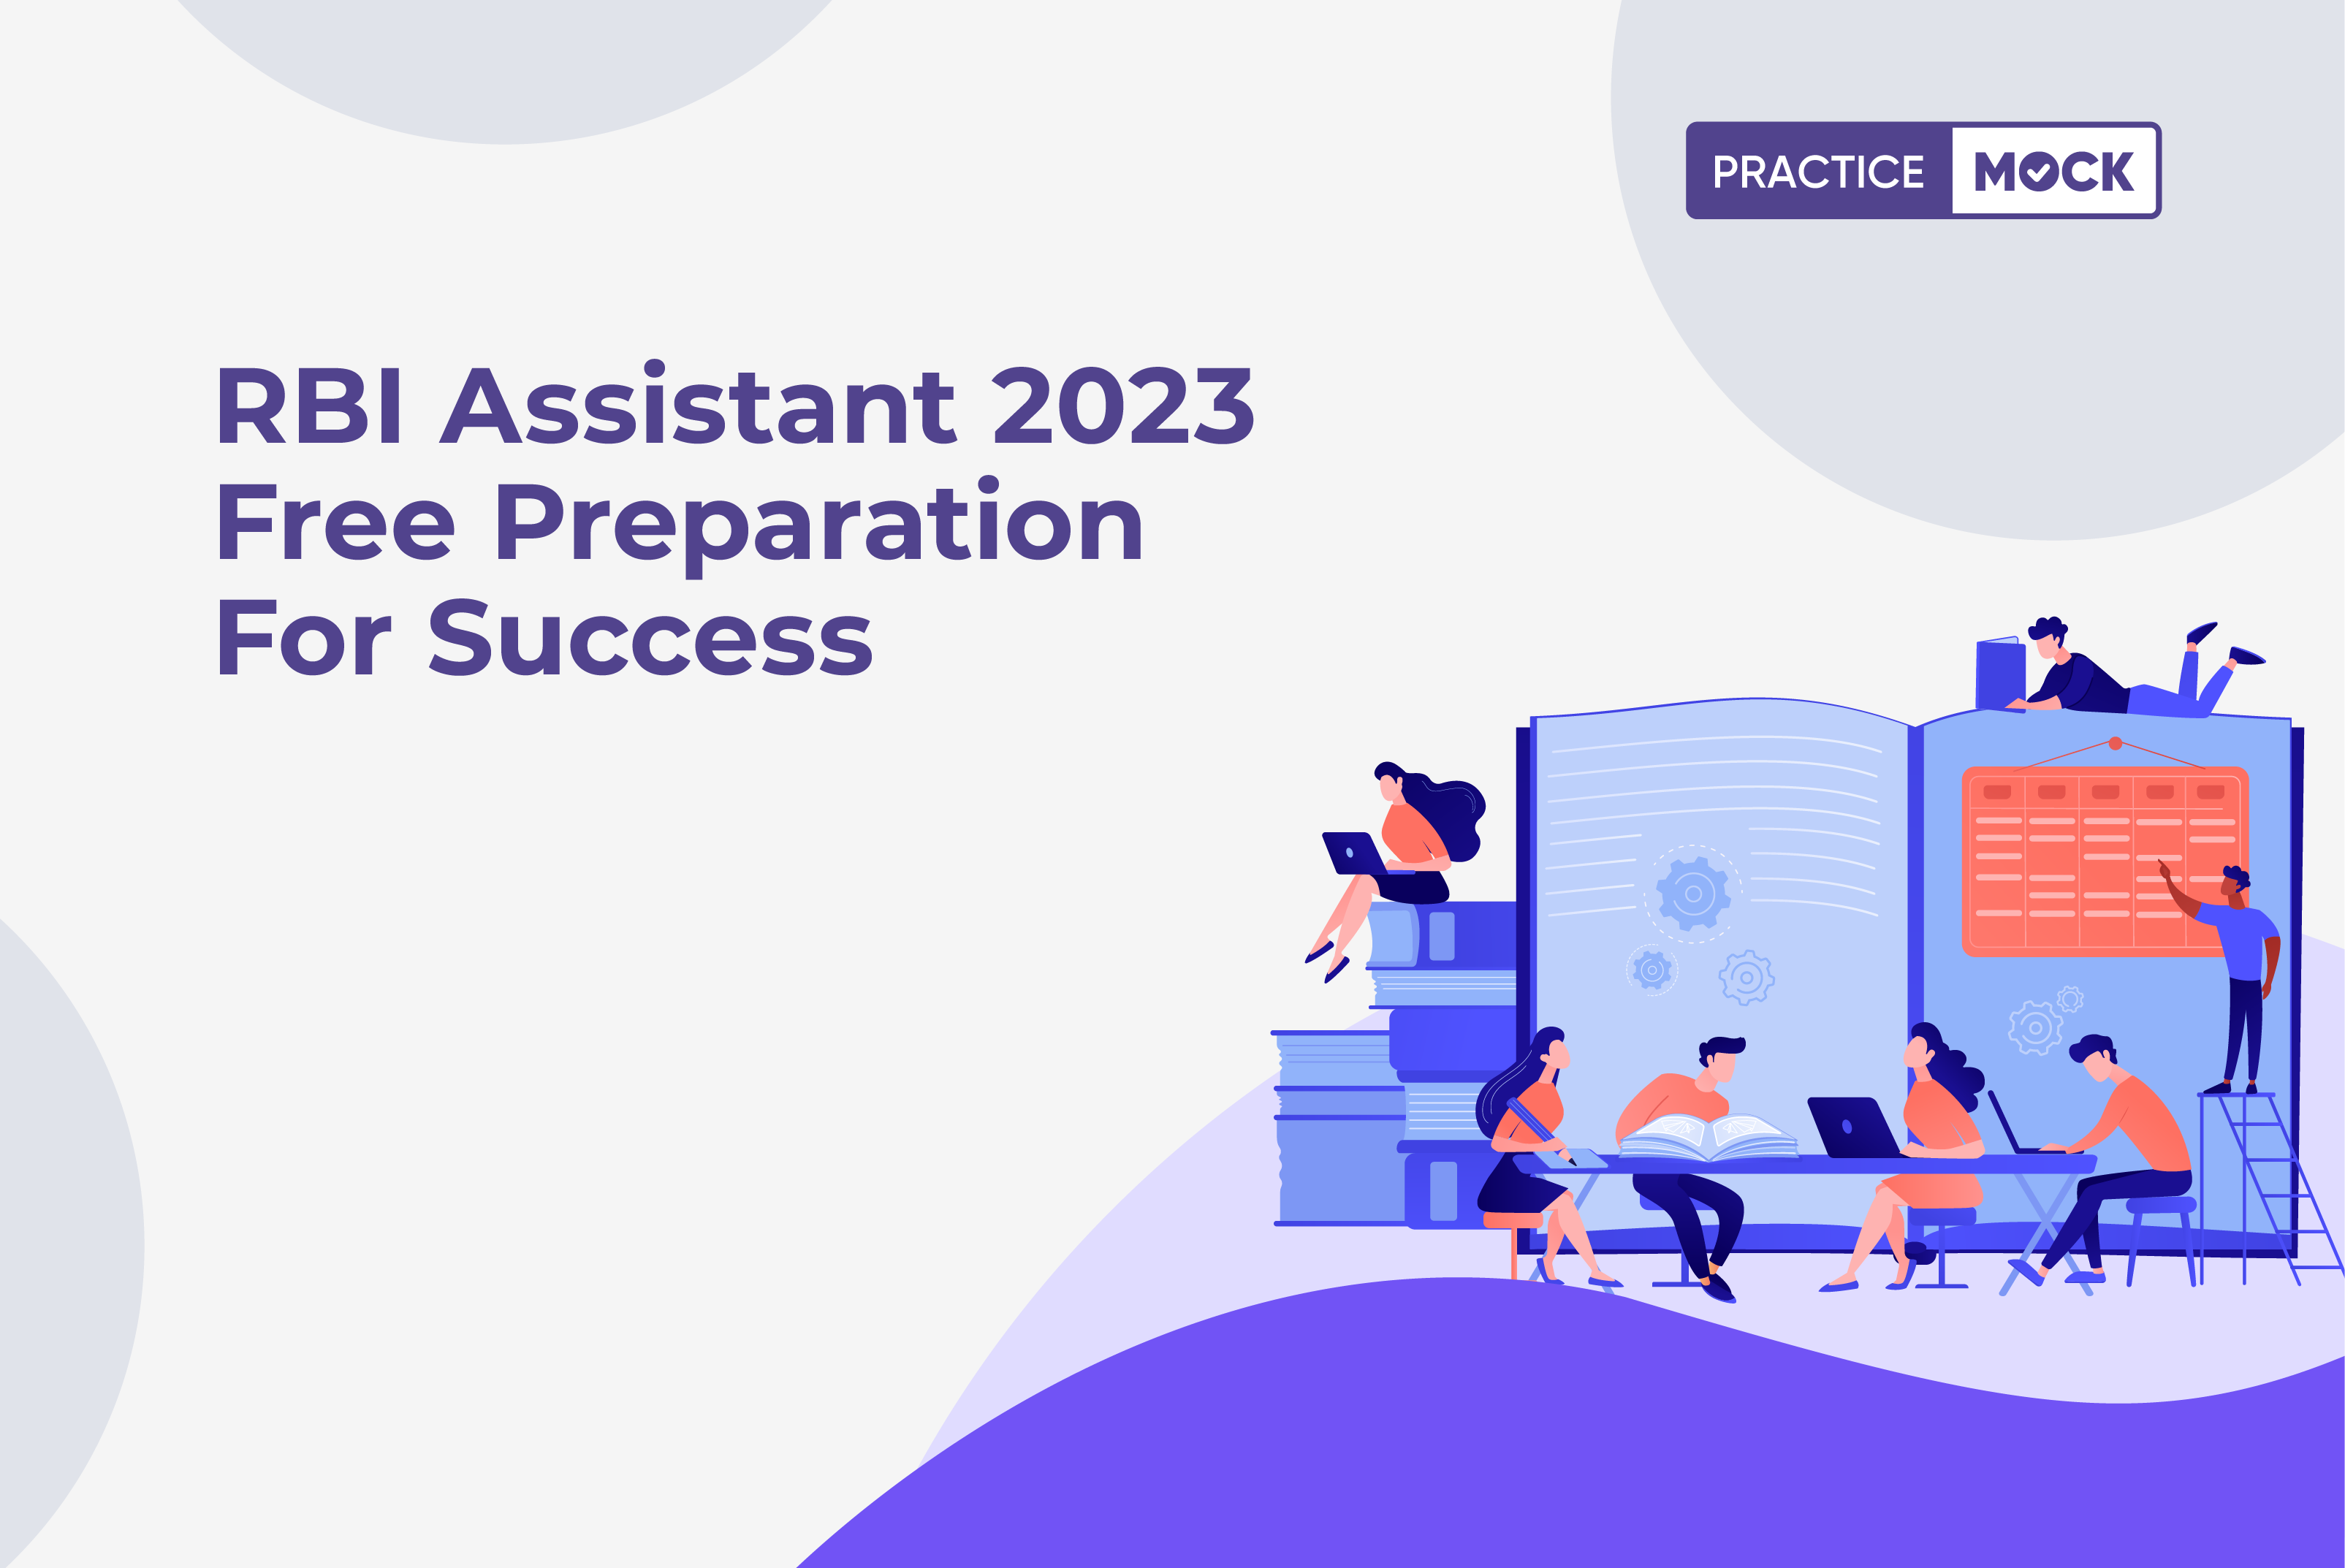 RBI Assistant 2023 Free Preparation for success